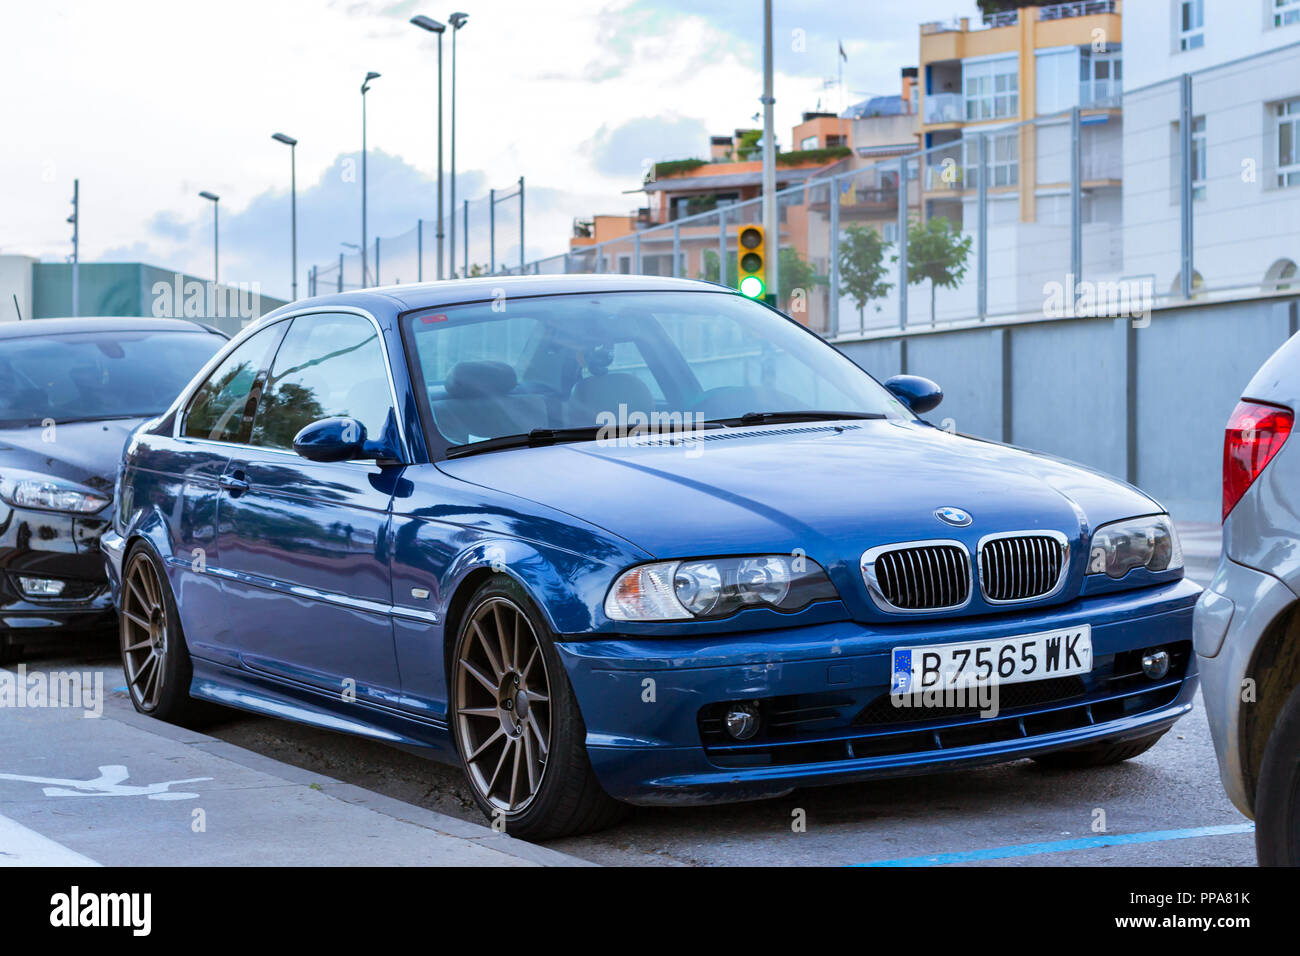 Download wallpapers BMW M5, park, E39, tuning, BMW 5-series